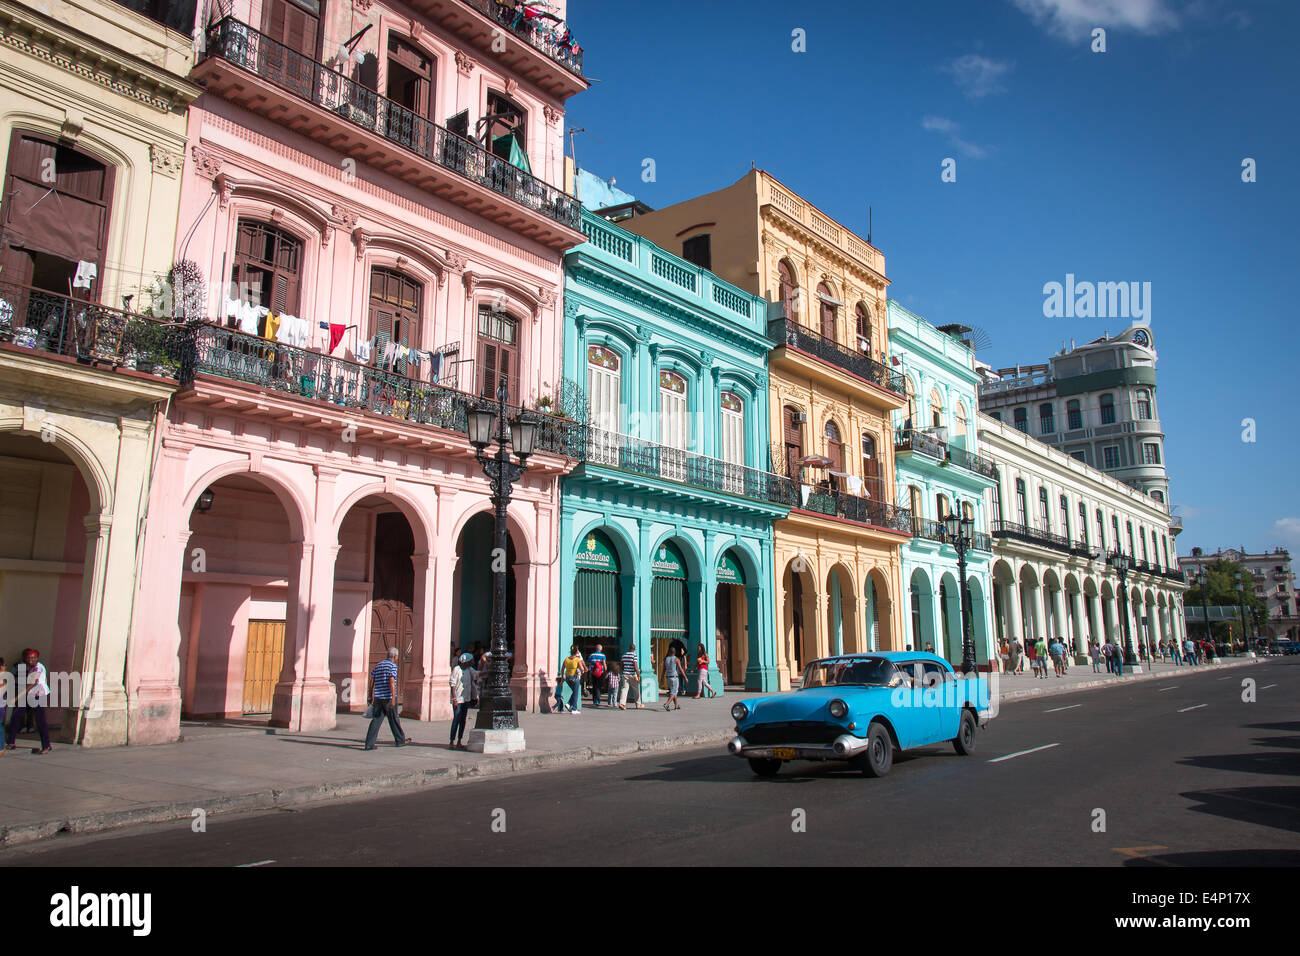 Pastel painted buildings with antique car in foreground, Capitolio, Havana, Cuba Stock Photo